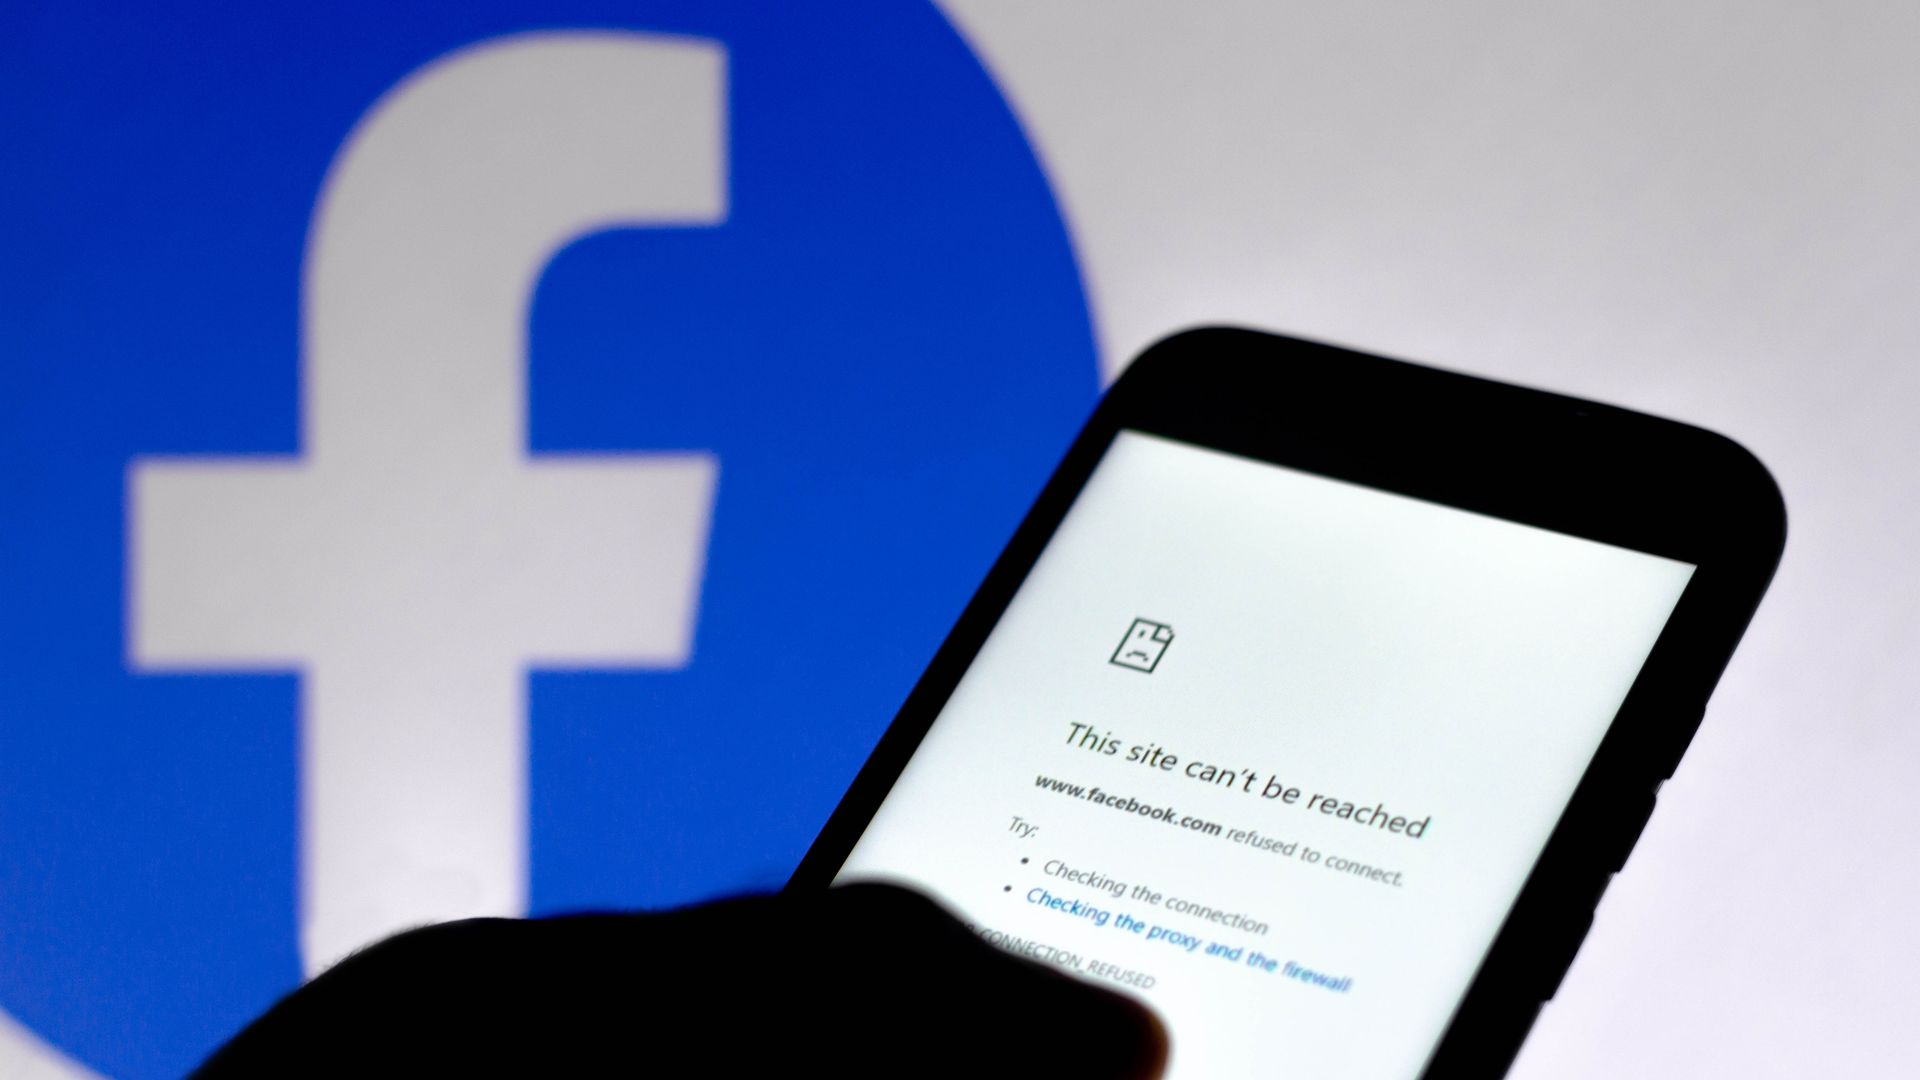  In this photo illustration, a message that says This site can't be reached, about an error of internet connection is seen on a smartphone screen with a Facebook logo in the background. 